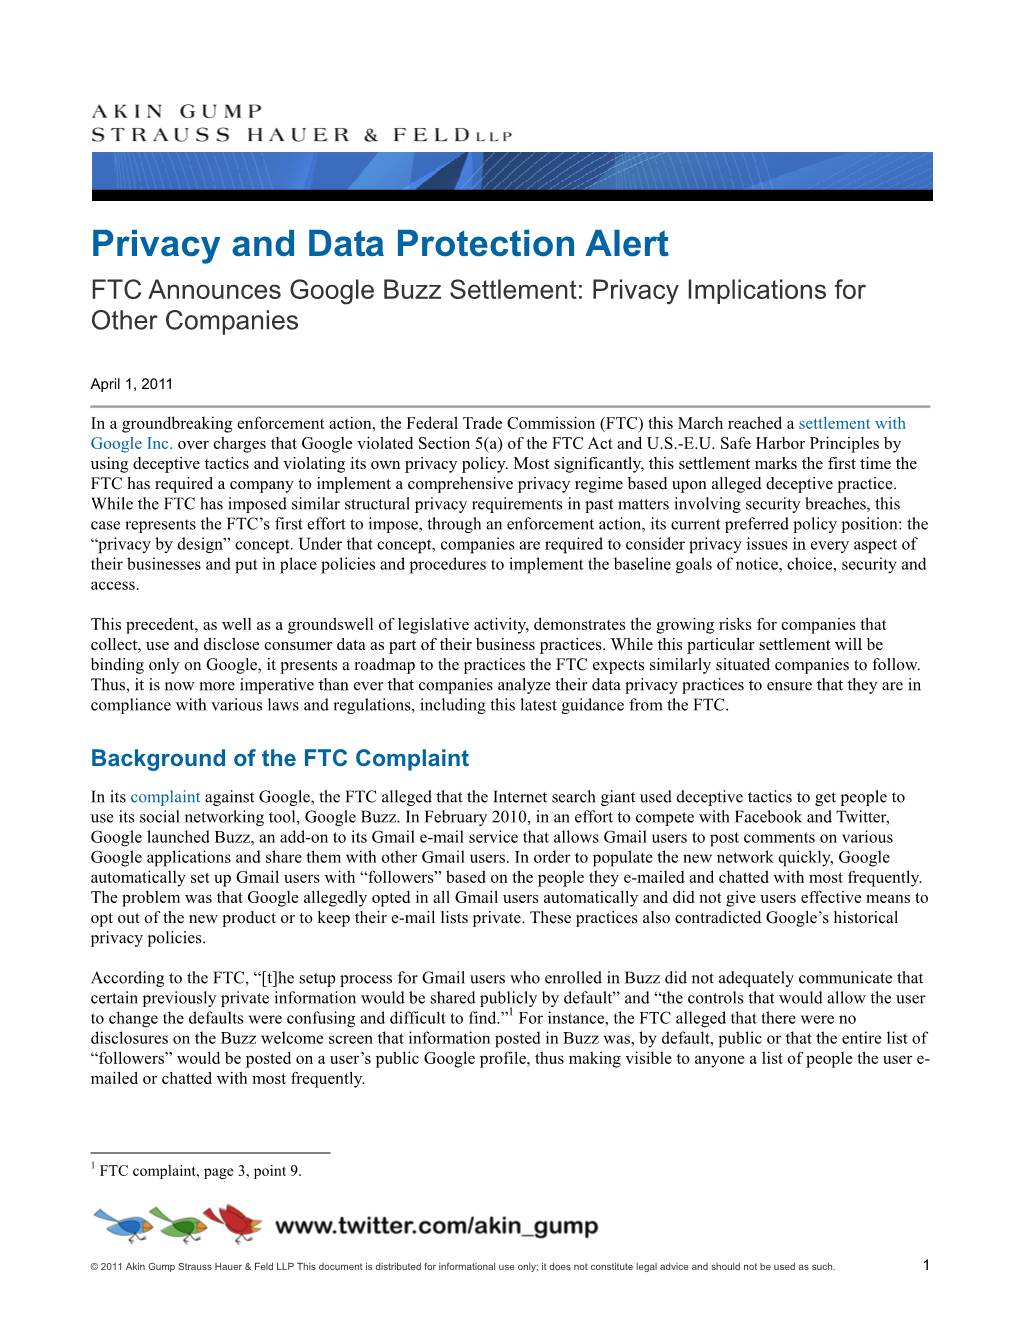 Privacy and Data Protection Alert FTC Announces Google Buzz Settlement: Privacy Implications for Other Companies